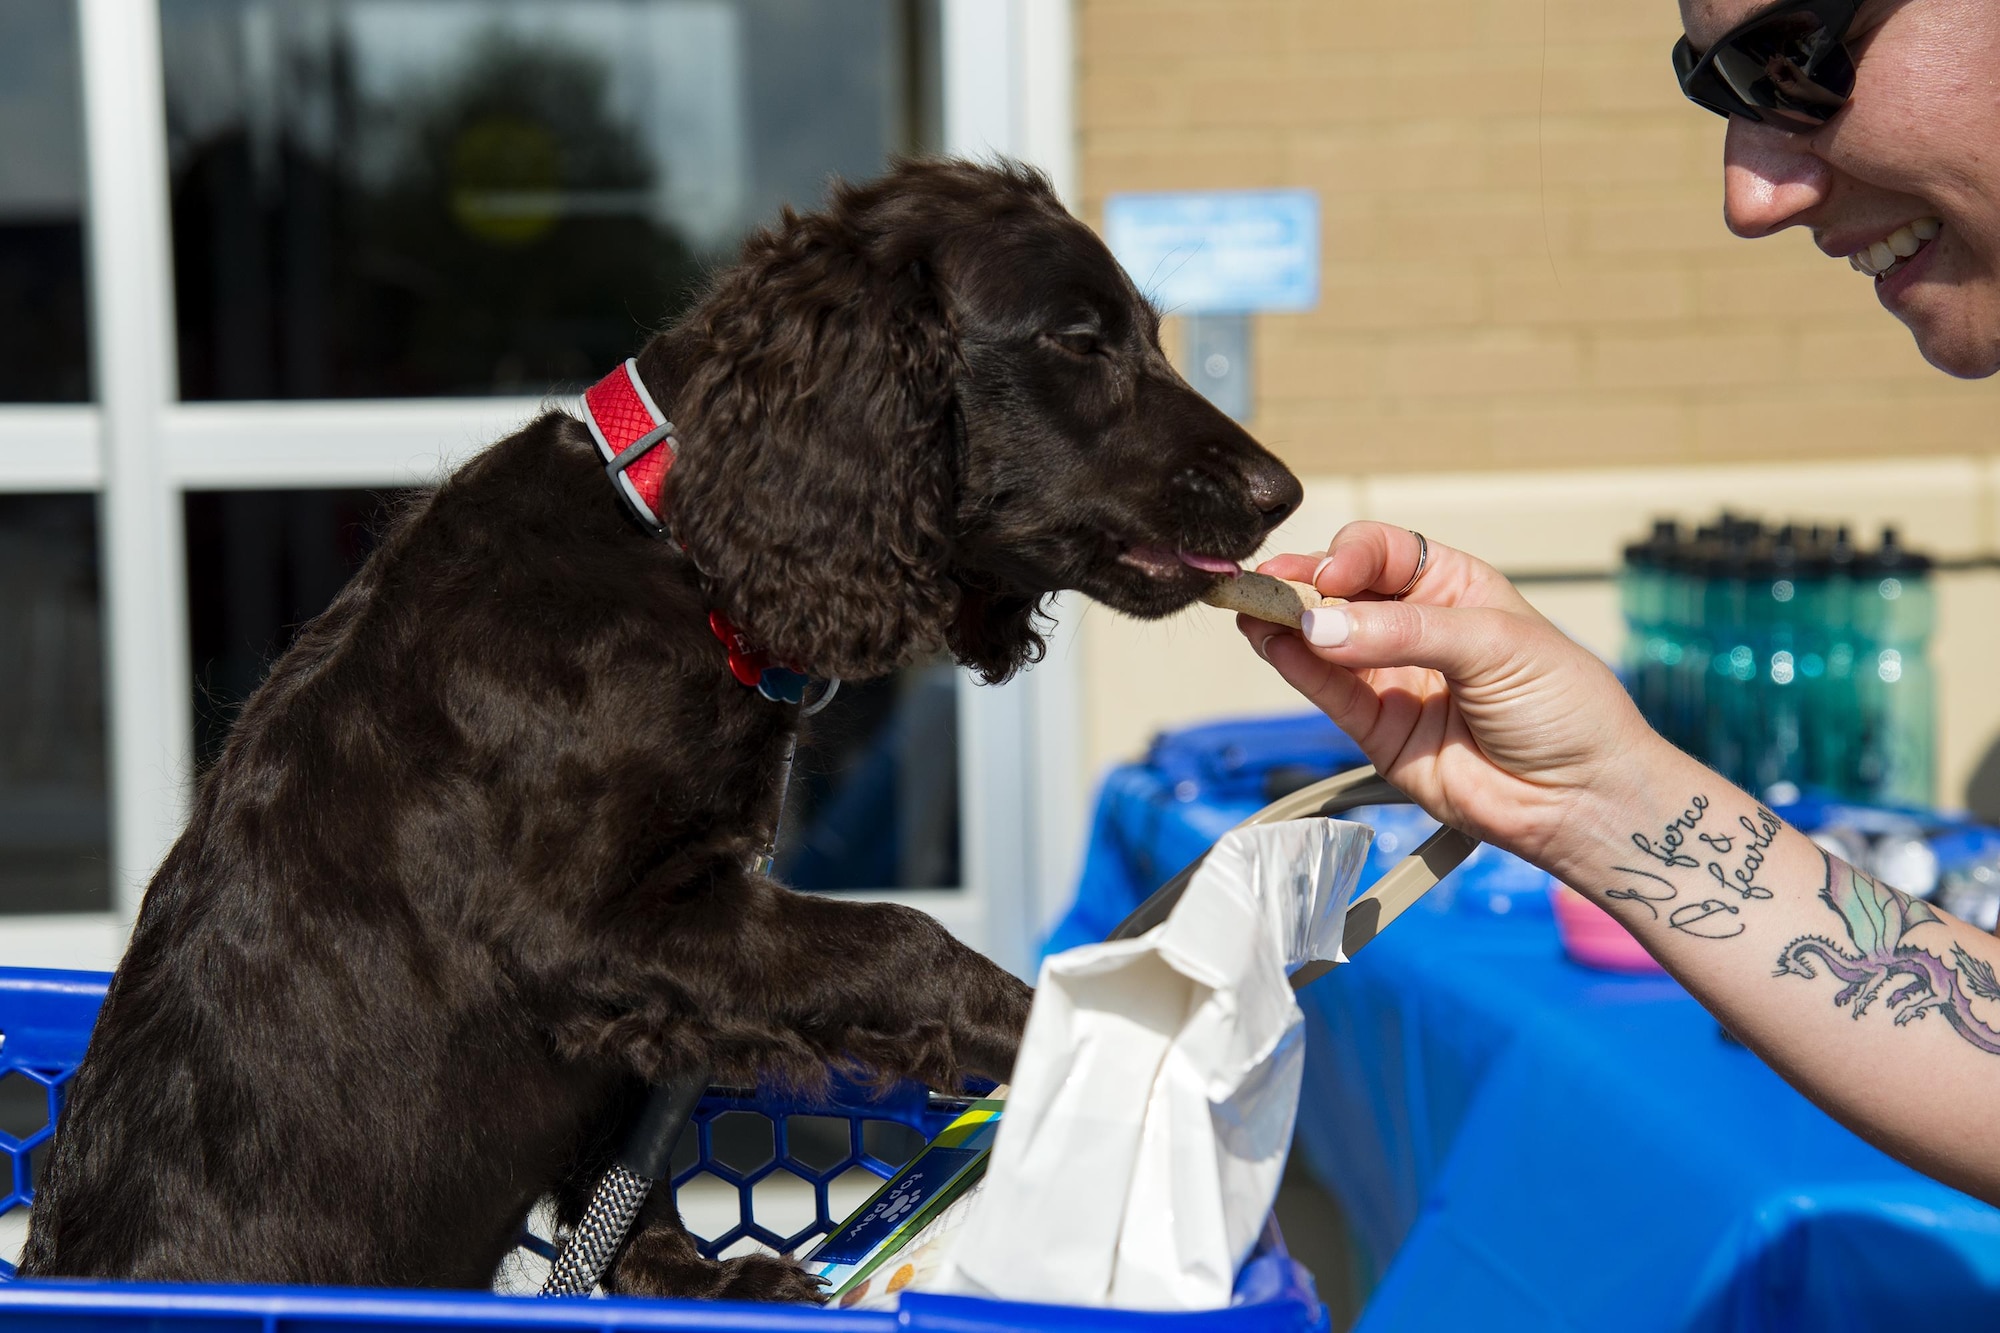 Master Sgt. Terri Adams, 23d Civil Engineer Squadron emergency management section chief, feeds a dog treat at a local pet store, Sept. 23, 2017, in Valdosta, Ga. Members of the 23d CES hosted the event as part of National Preparedness Month to educate pet owners on disaster precautions. (U.S. Air Force photo by Airman 1st Class Erick Requadt)